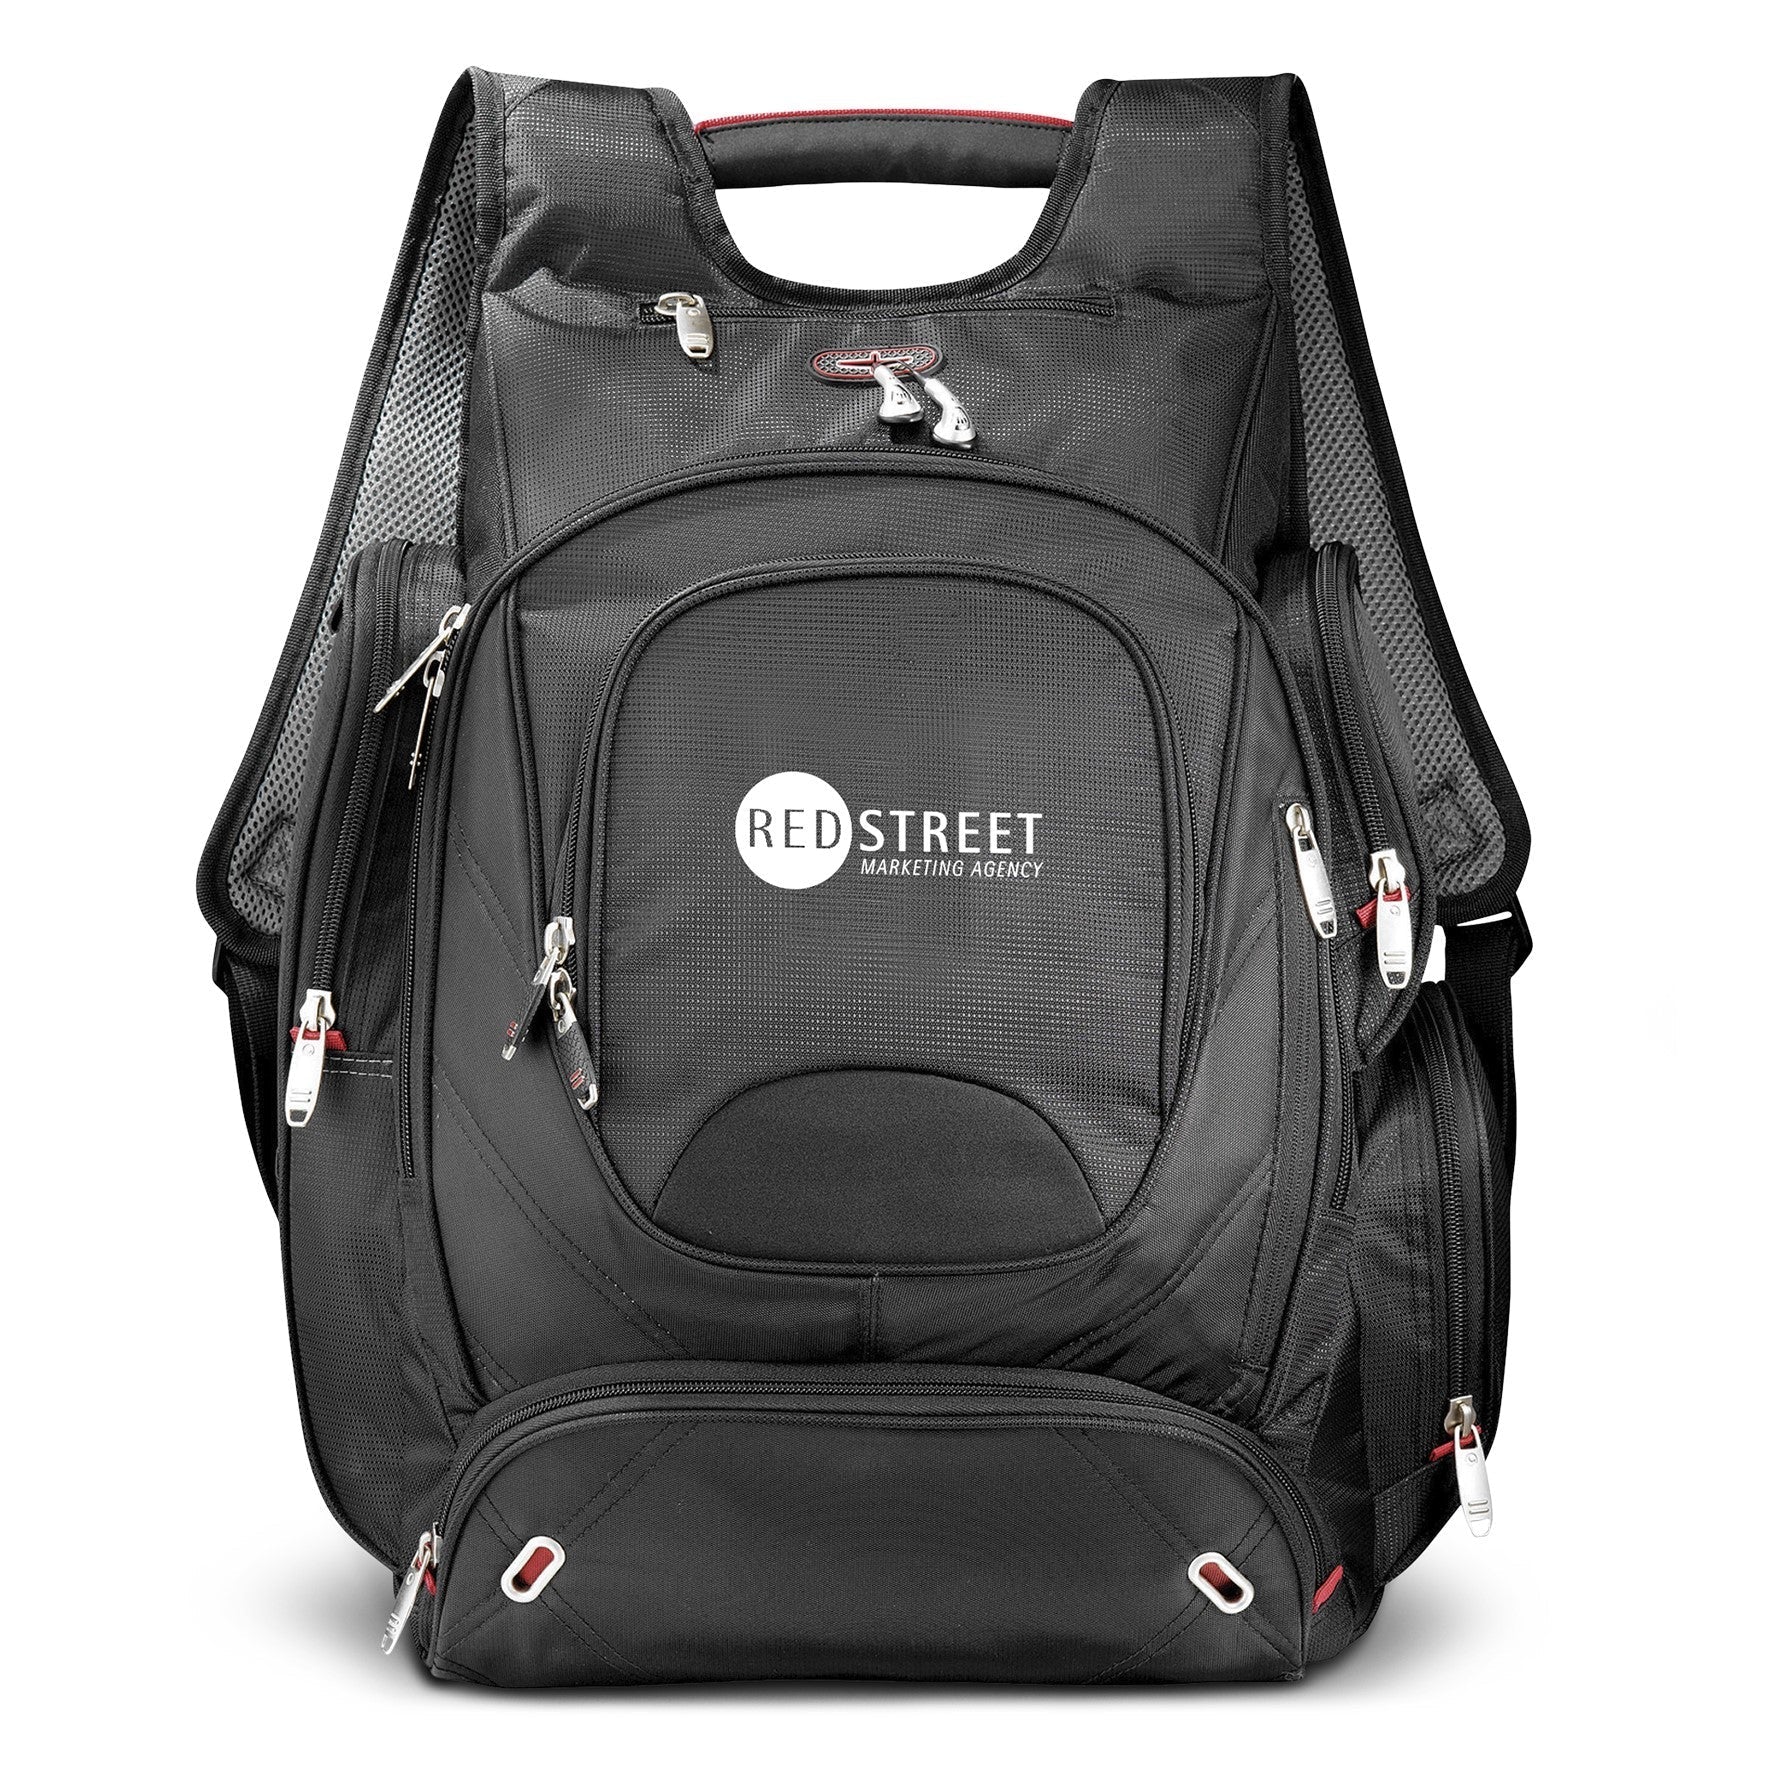 A black technology backpack branded in one colour